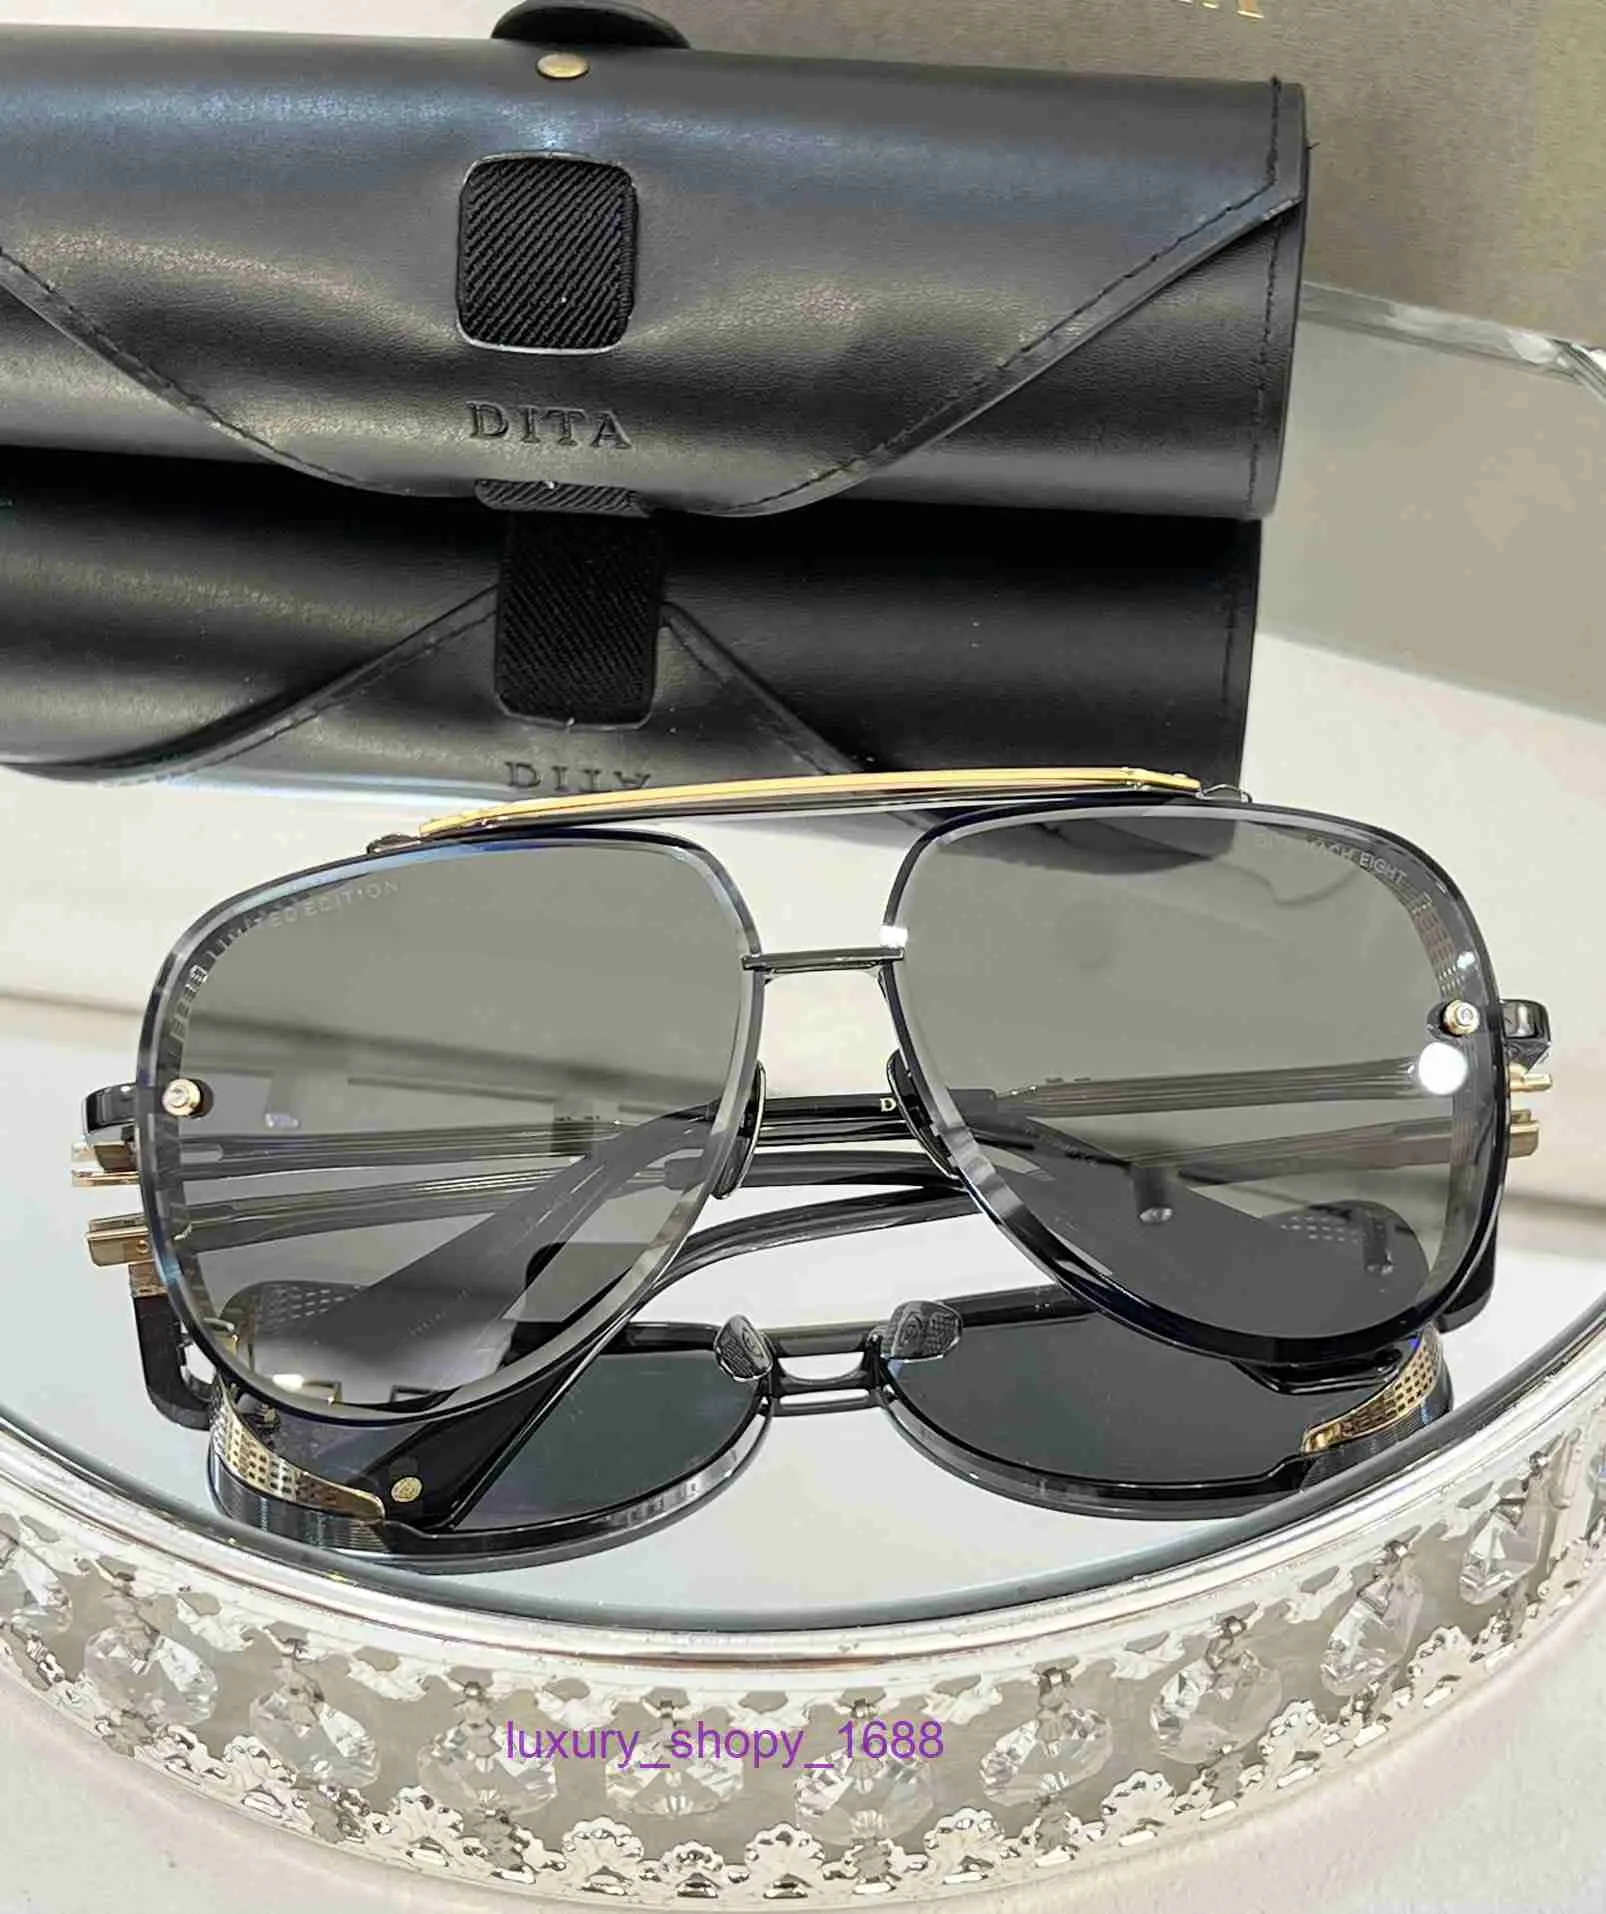 DITA LIMITED EDITION toad screen top quality Designer sunglasses perfect replica quality assurance one-to-one replica models with original box 3W6F